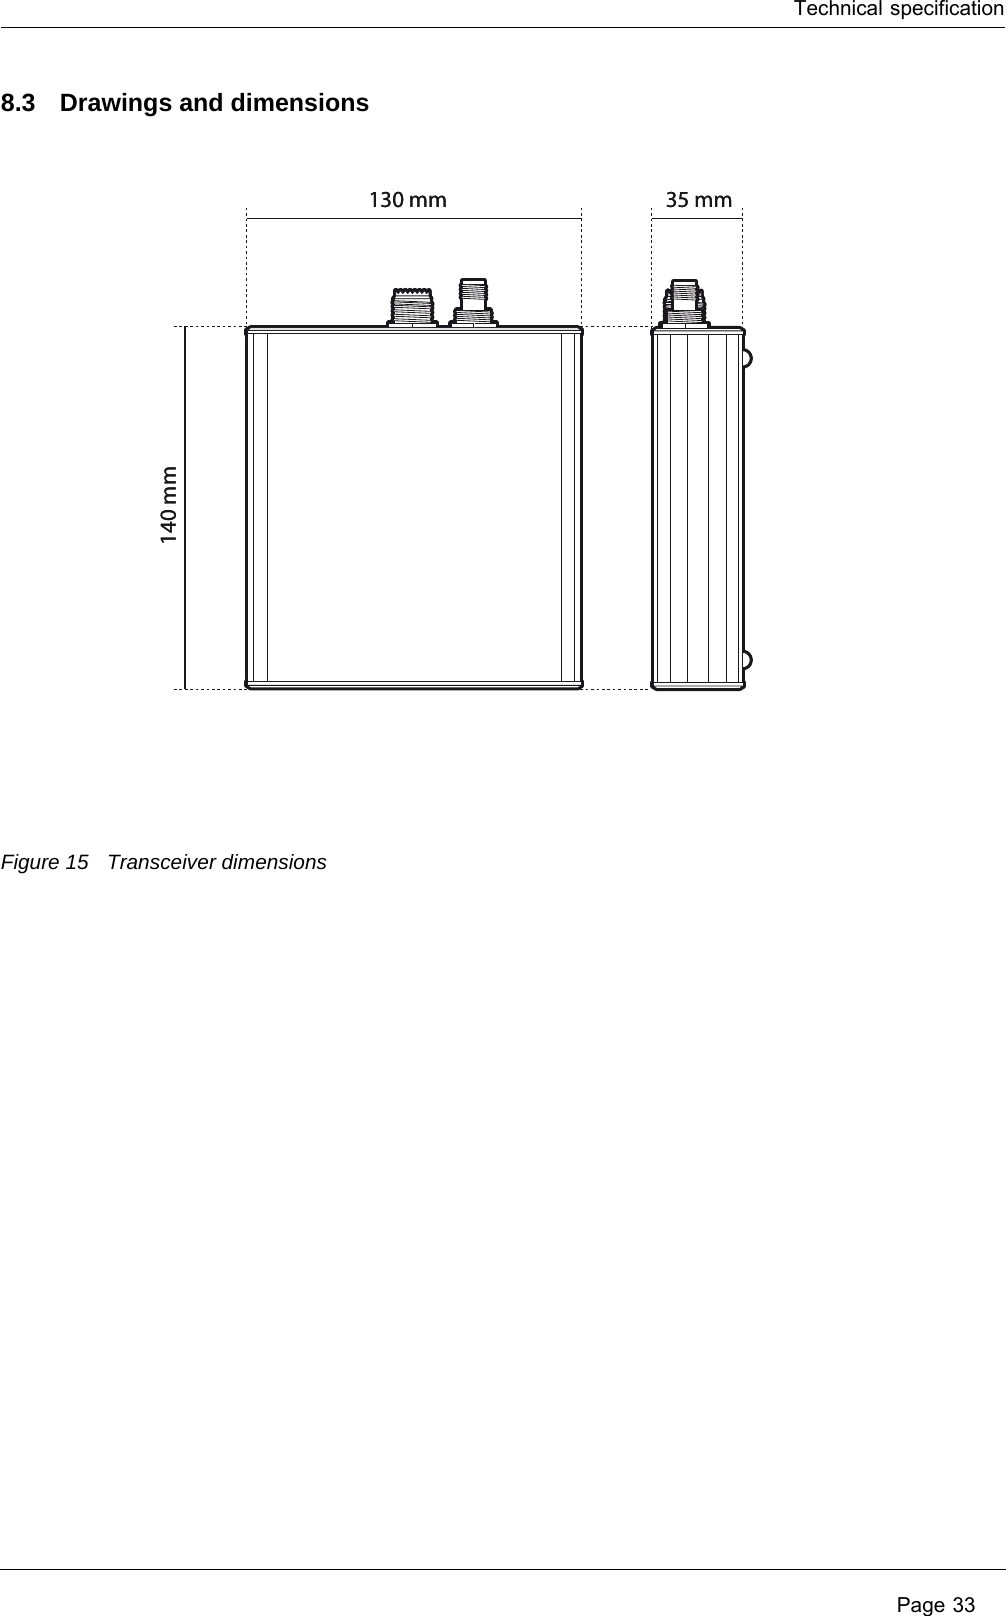 Technical specification Page 338.3 Drawings and dimensionsFigure 15 Transceiver dimensions140 mm140 mm130 mm 35 mm130 mm 35 mm